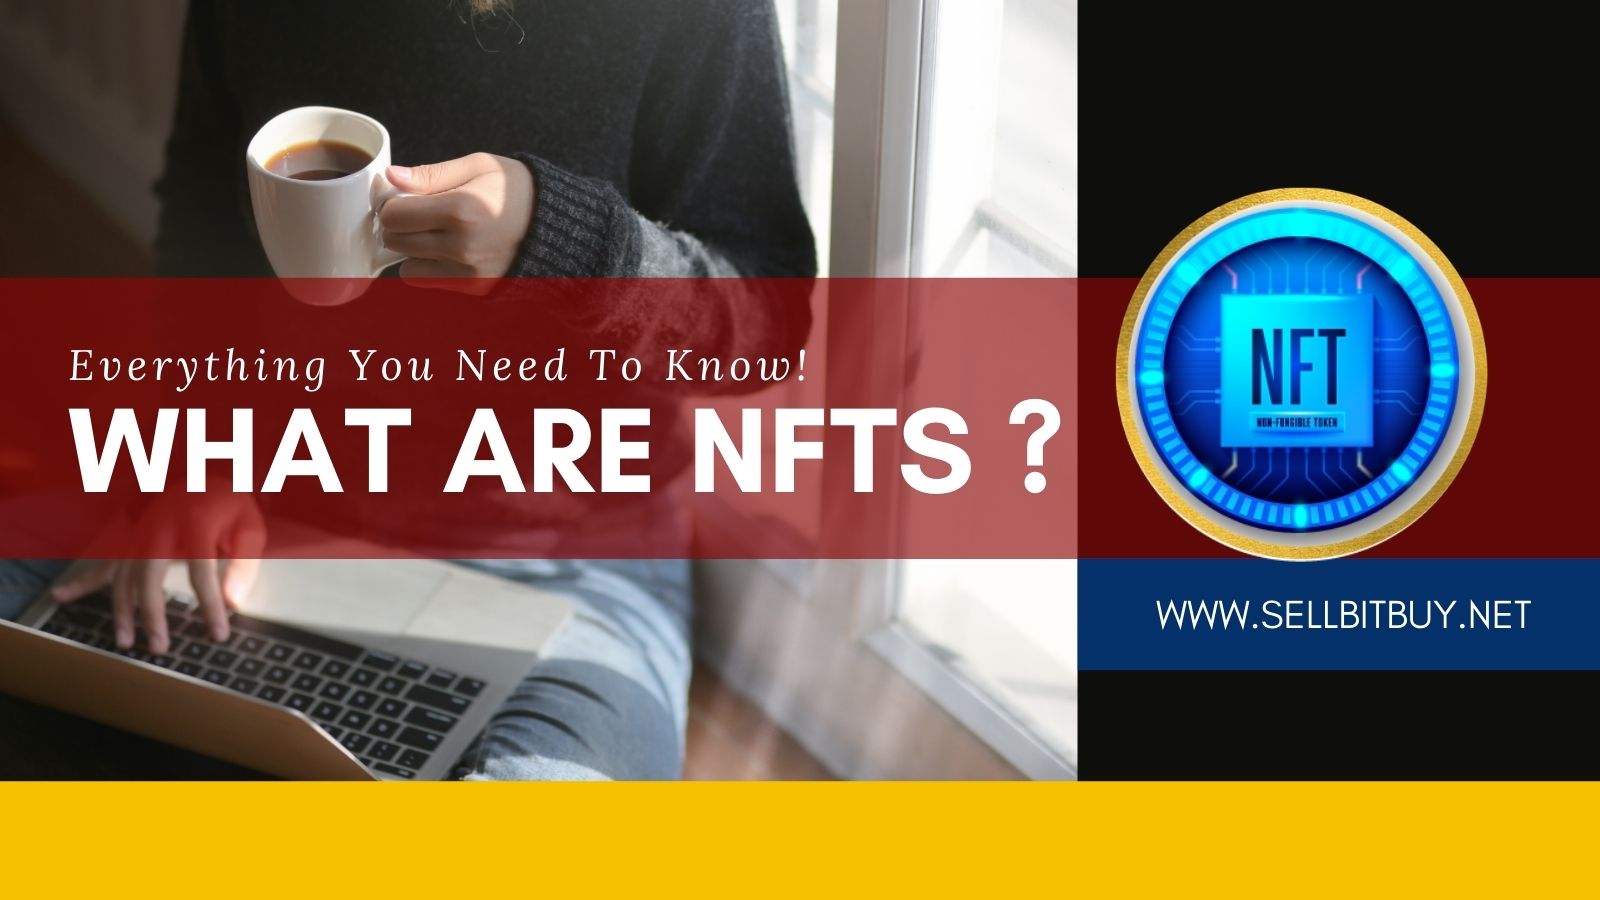 What are Non Fungible Tokens (NFTs)? - Everything You Need To Know